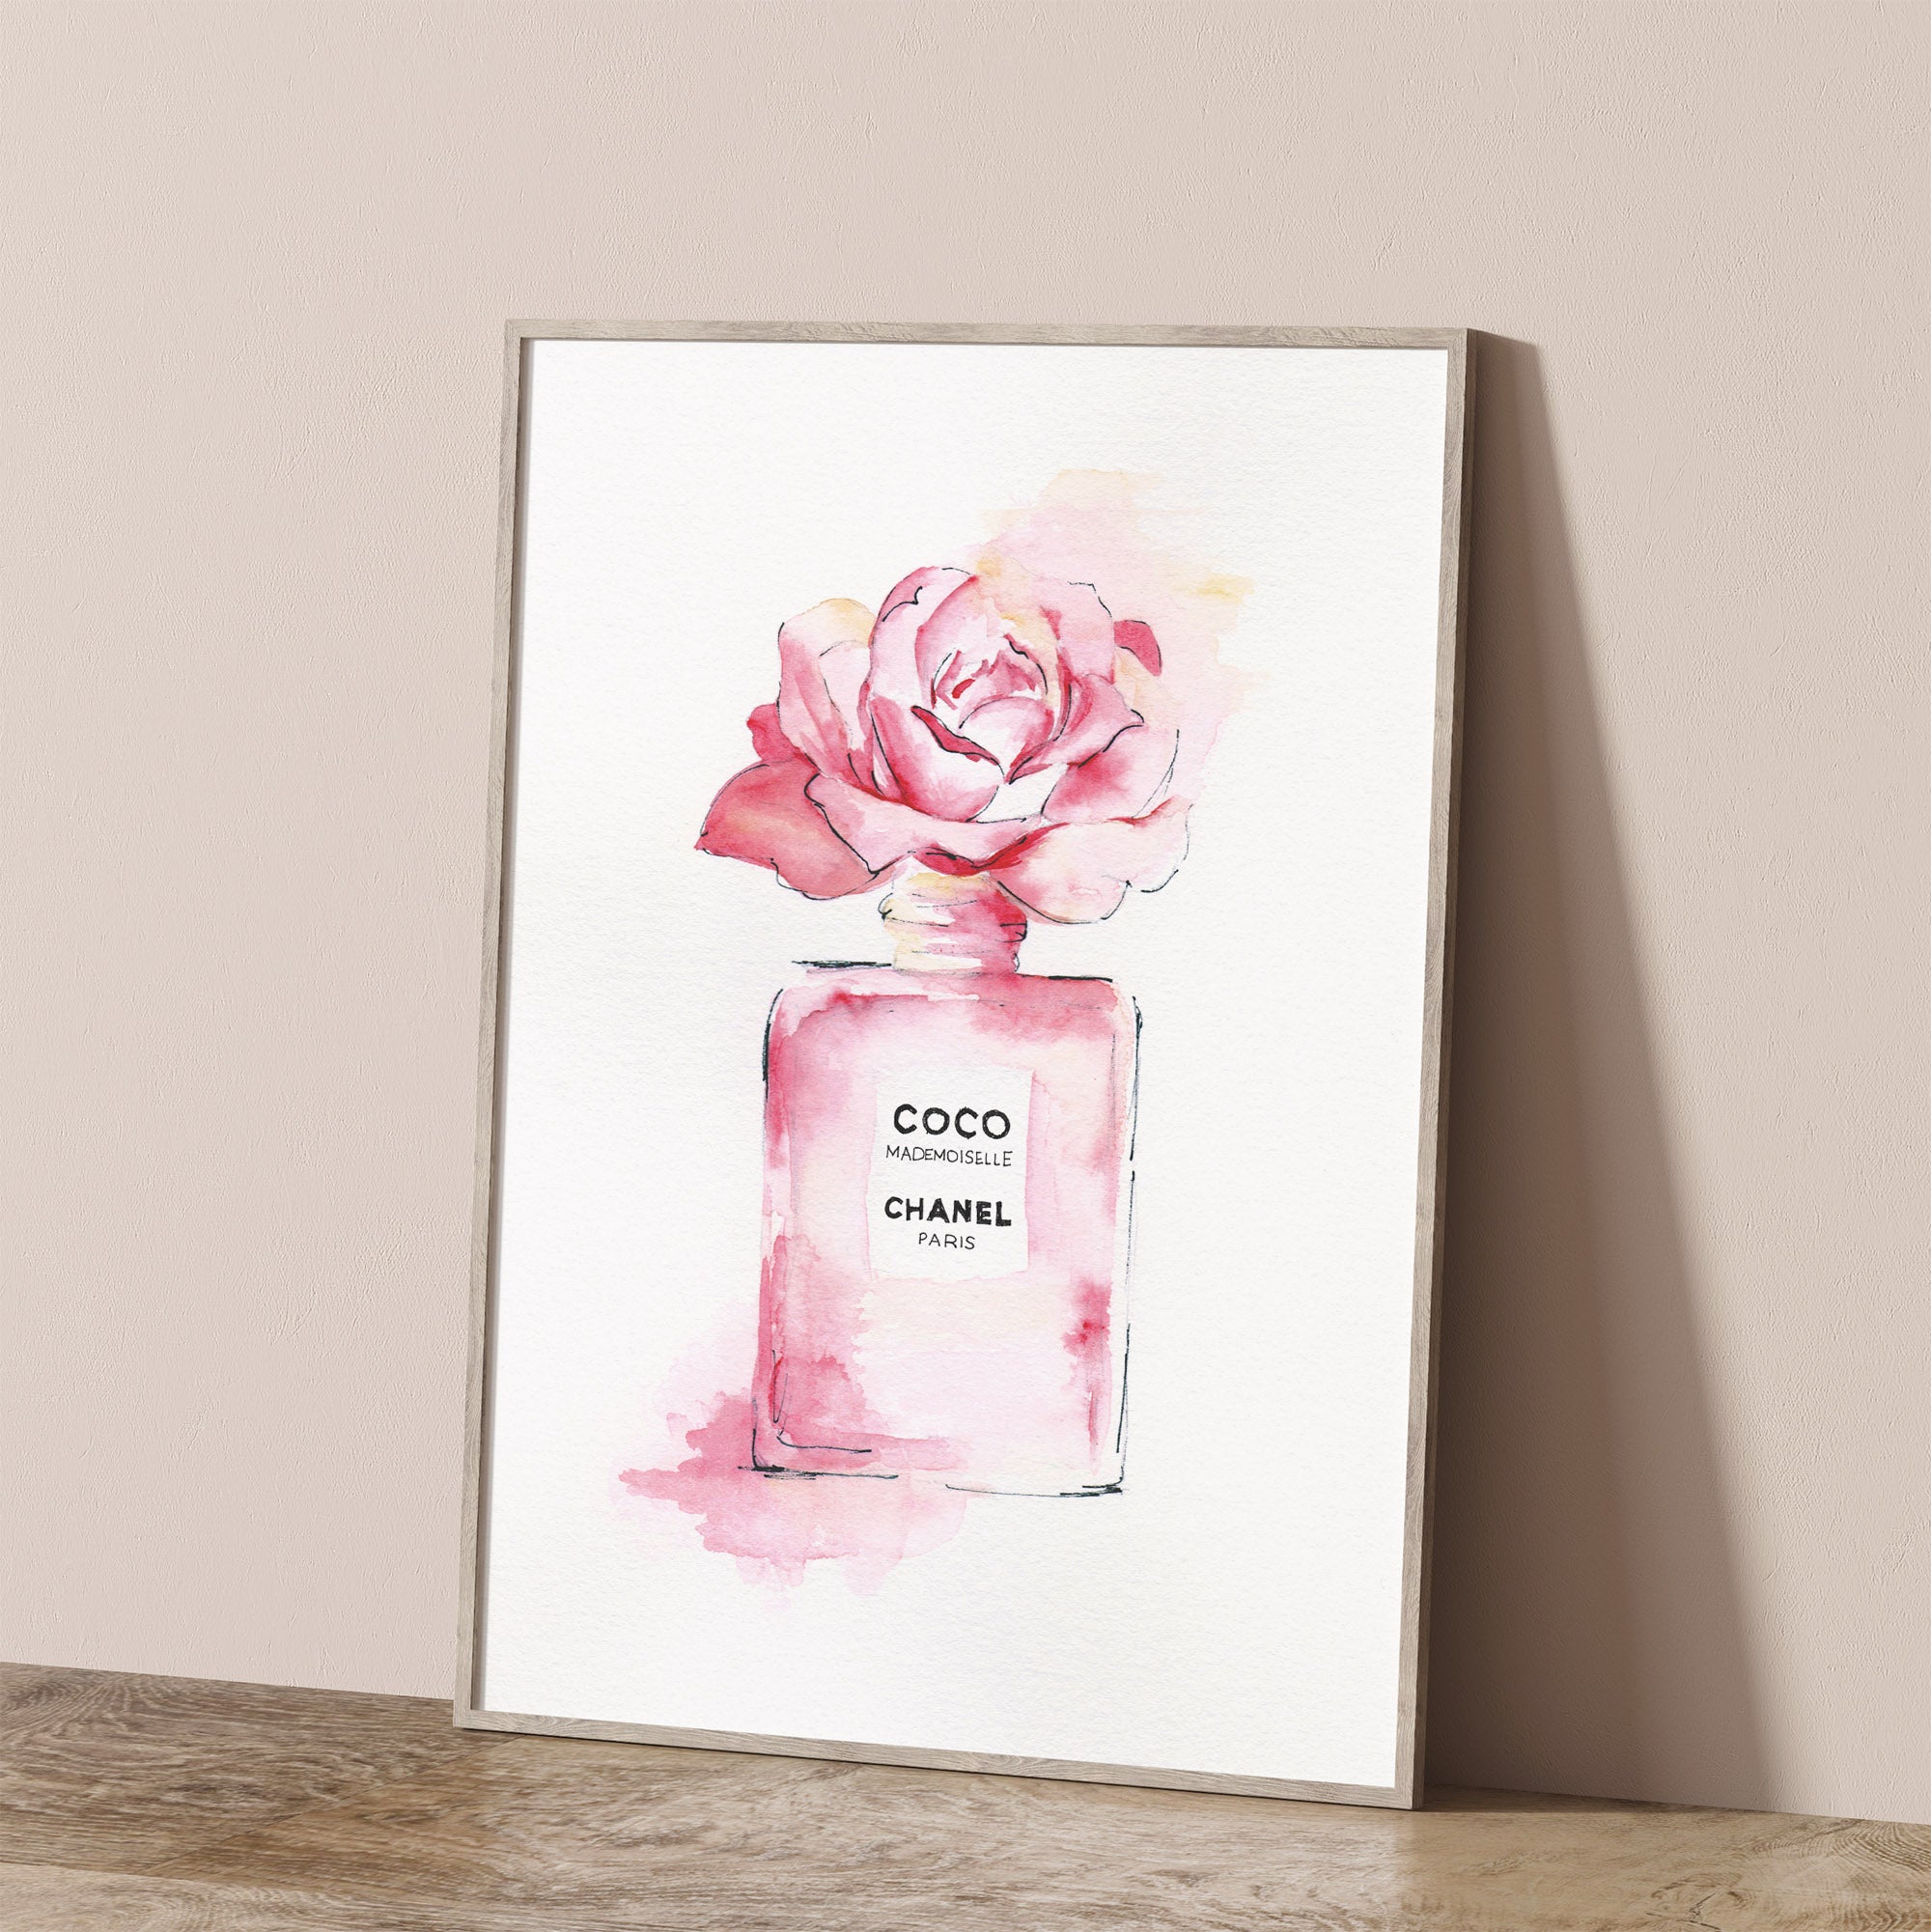 Designer wall art with a Chanel perfume bottle below a rose